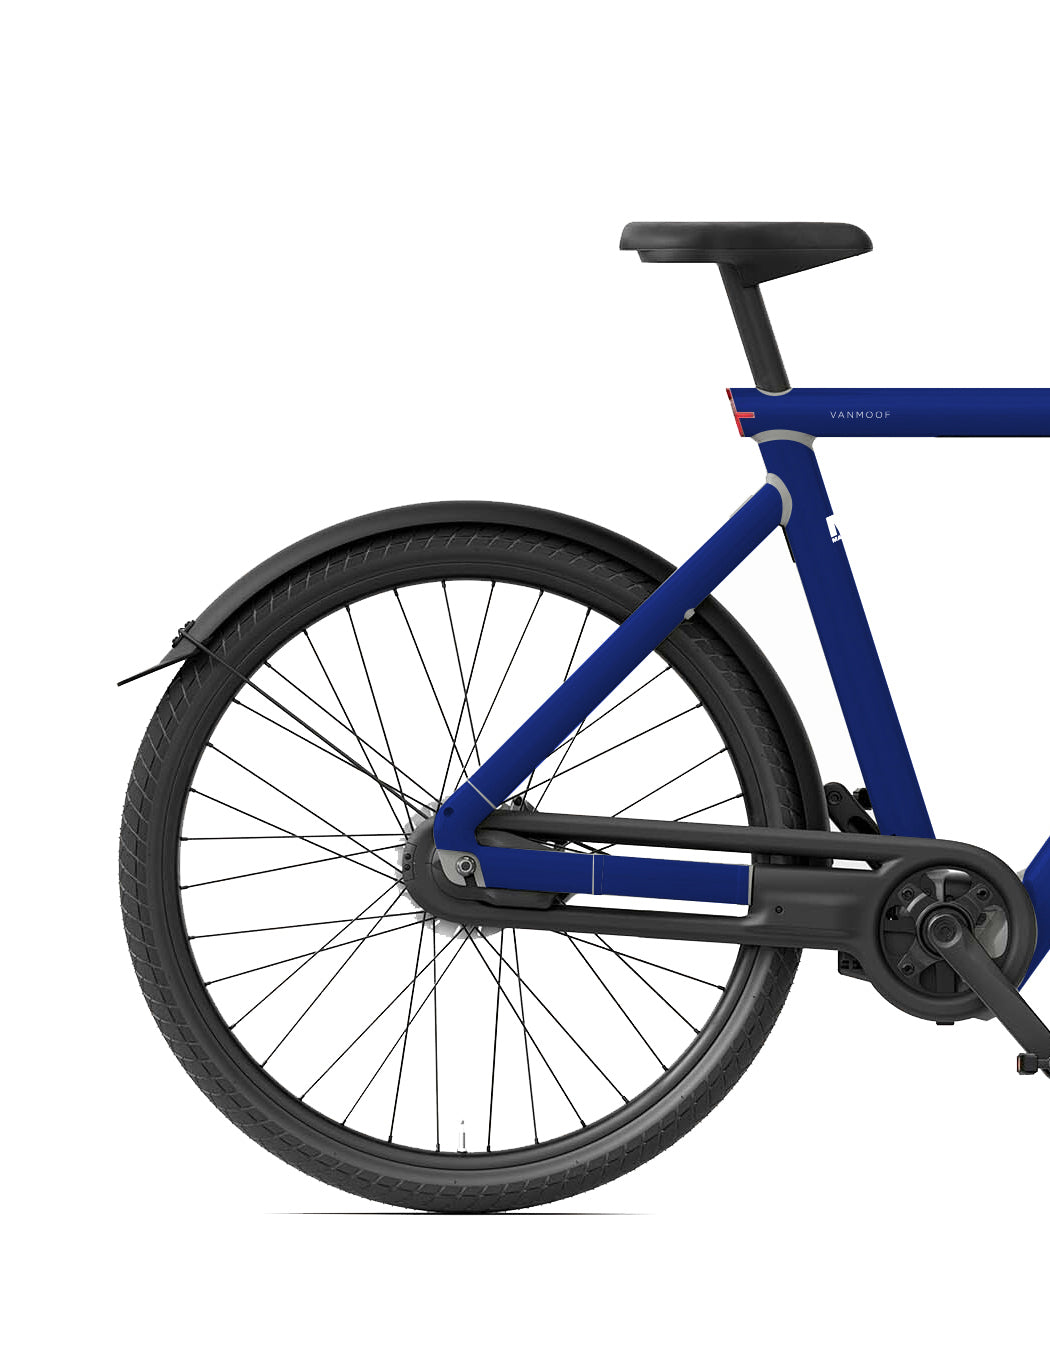 NAVY BLUE PROTECT KIT FOR VANMOOF S5